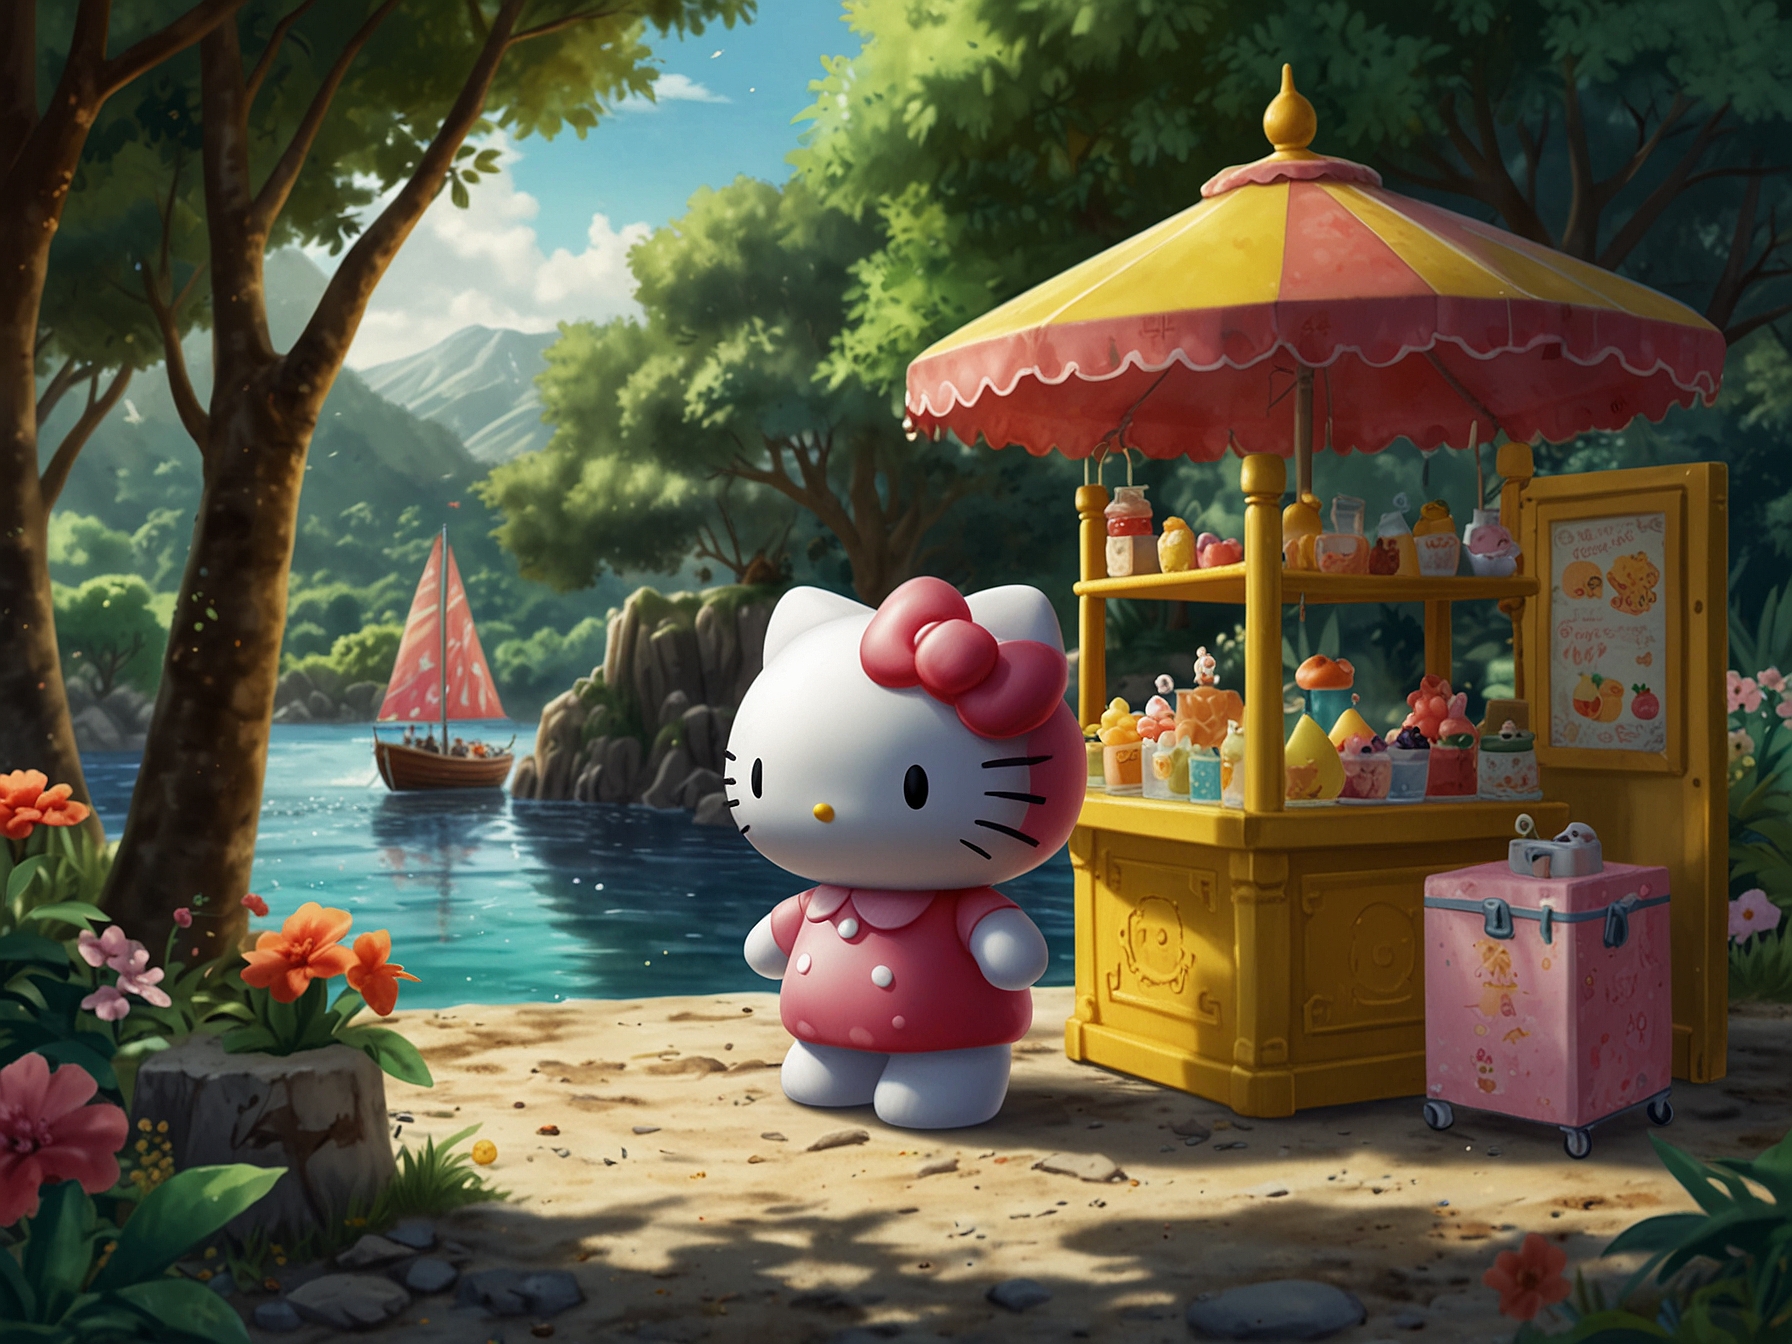 A vibrant scene from Hello Kitty Island Adventure showcasing the new lemonade stand event. Players can join My Melody, collecting and trading lemonade for citrus-themed items and decorations.